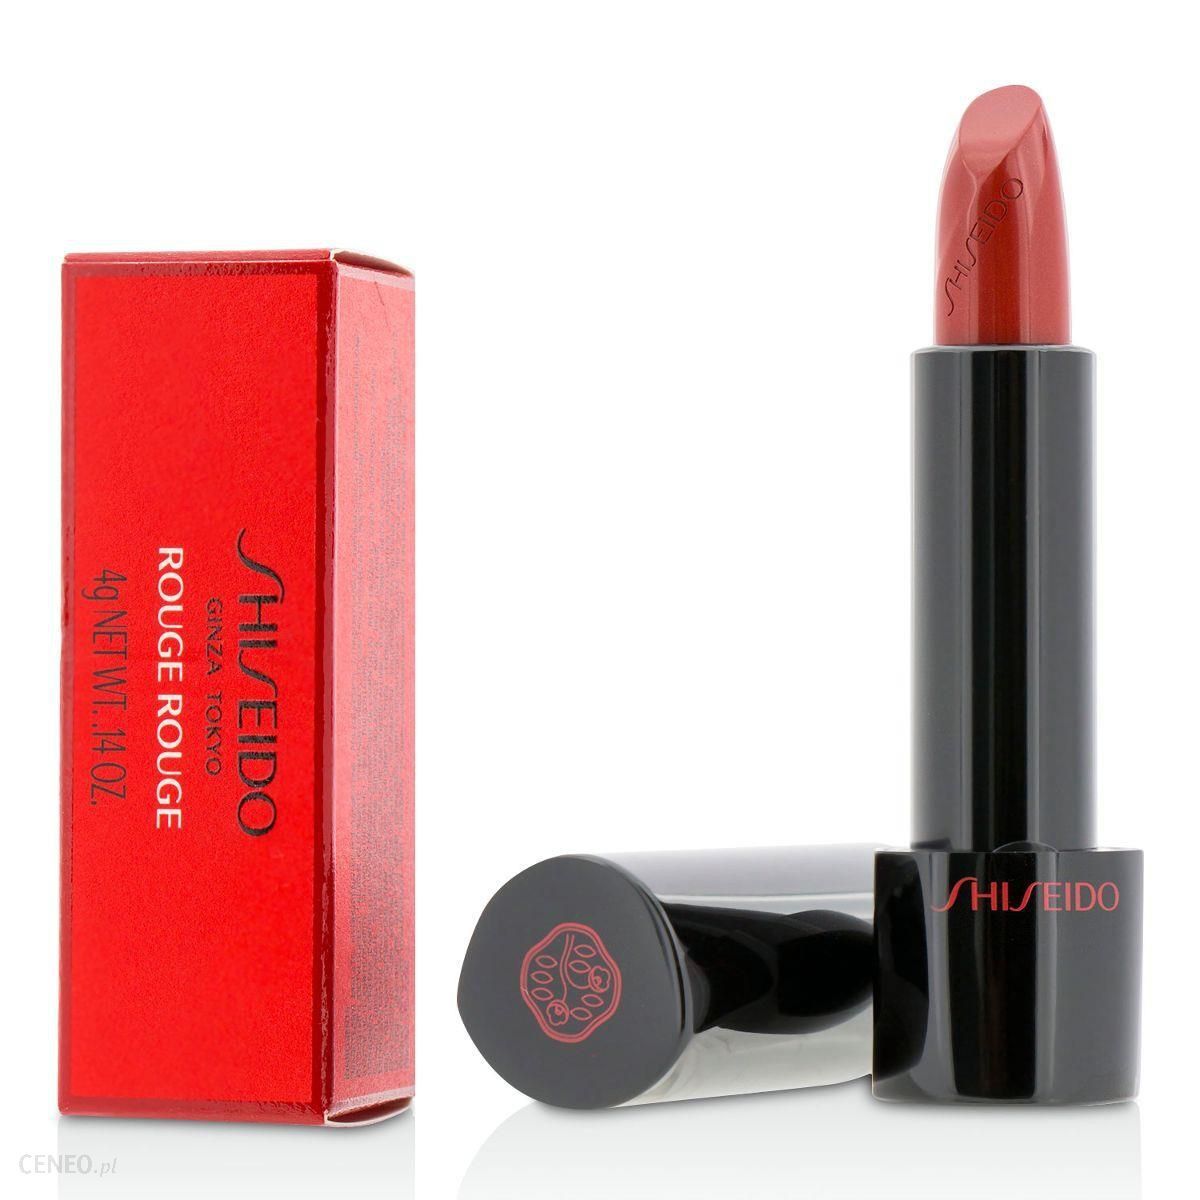 Shiseido Rouge Rouge Lipstick 4g. RD502 Real Ruby